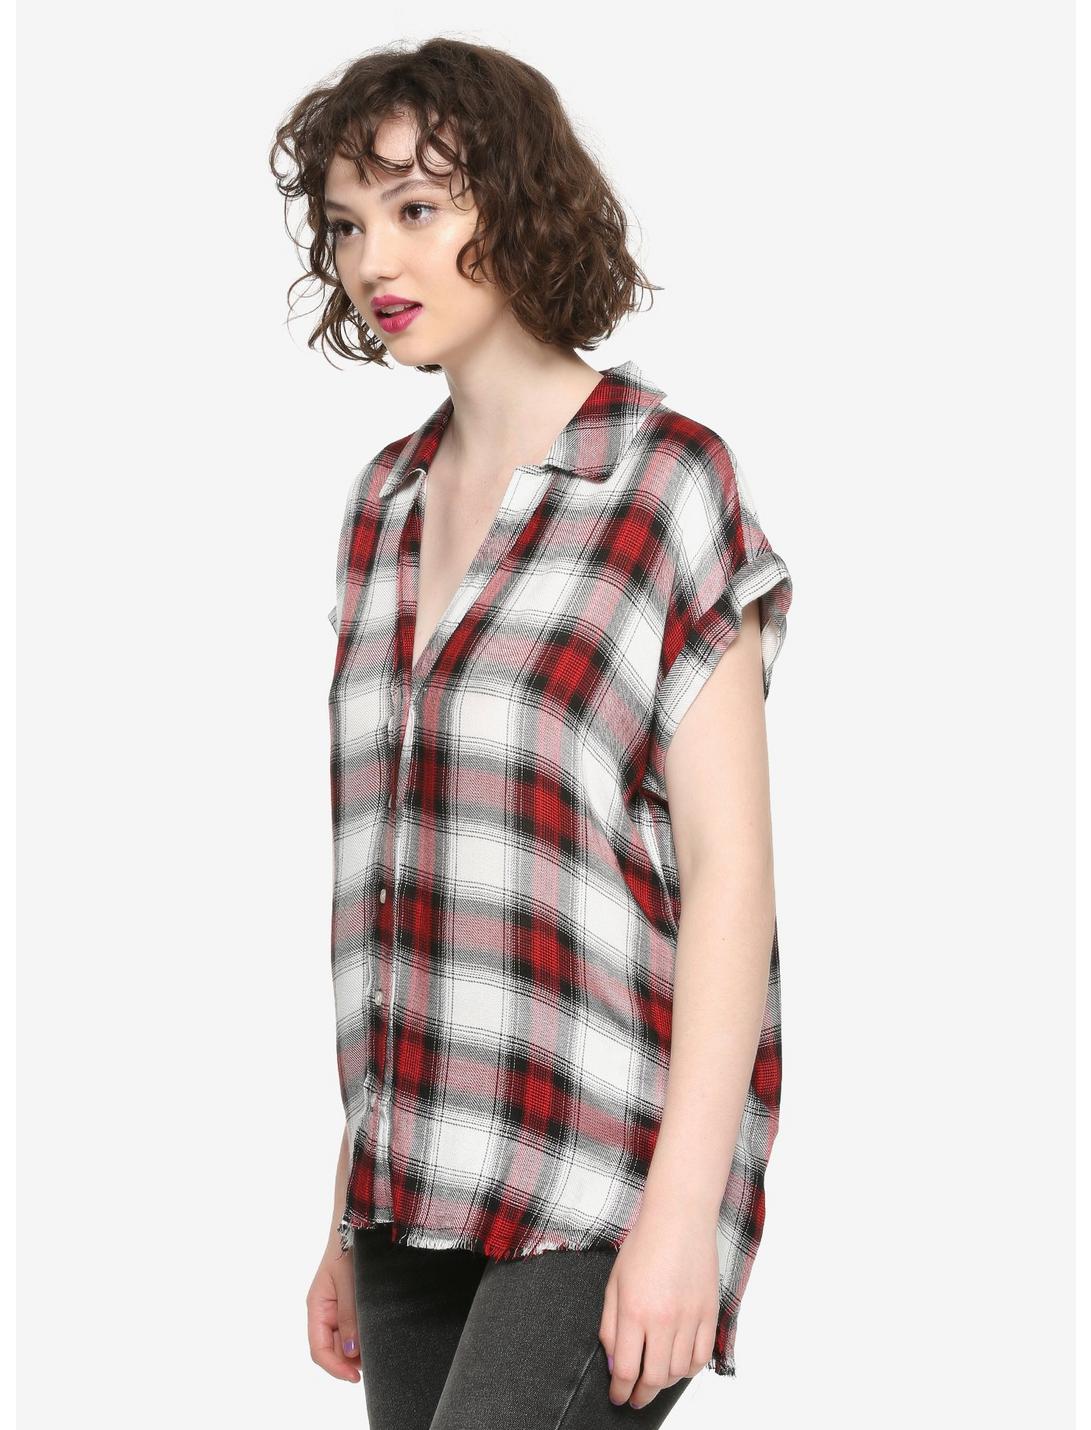 Red Black & White Plaid Girls Button-Up Woven Top, PLAID, hi-res